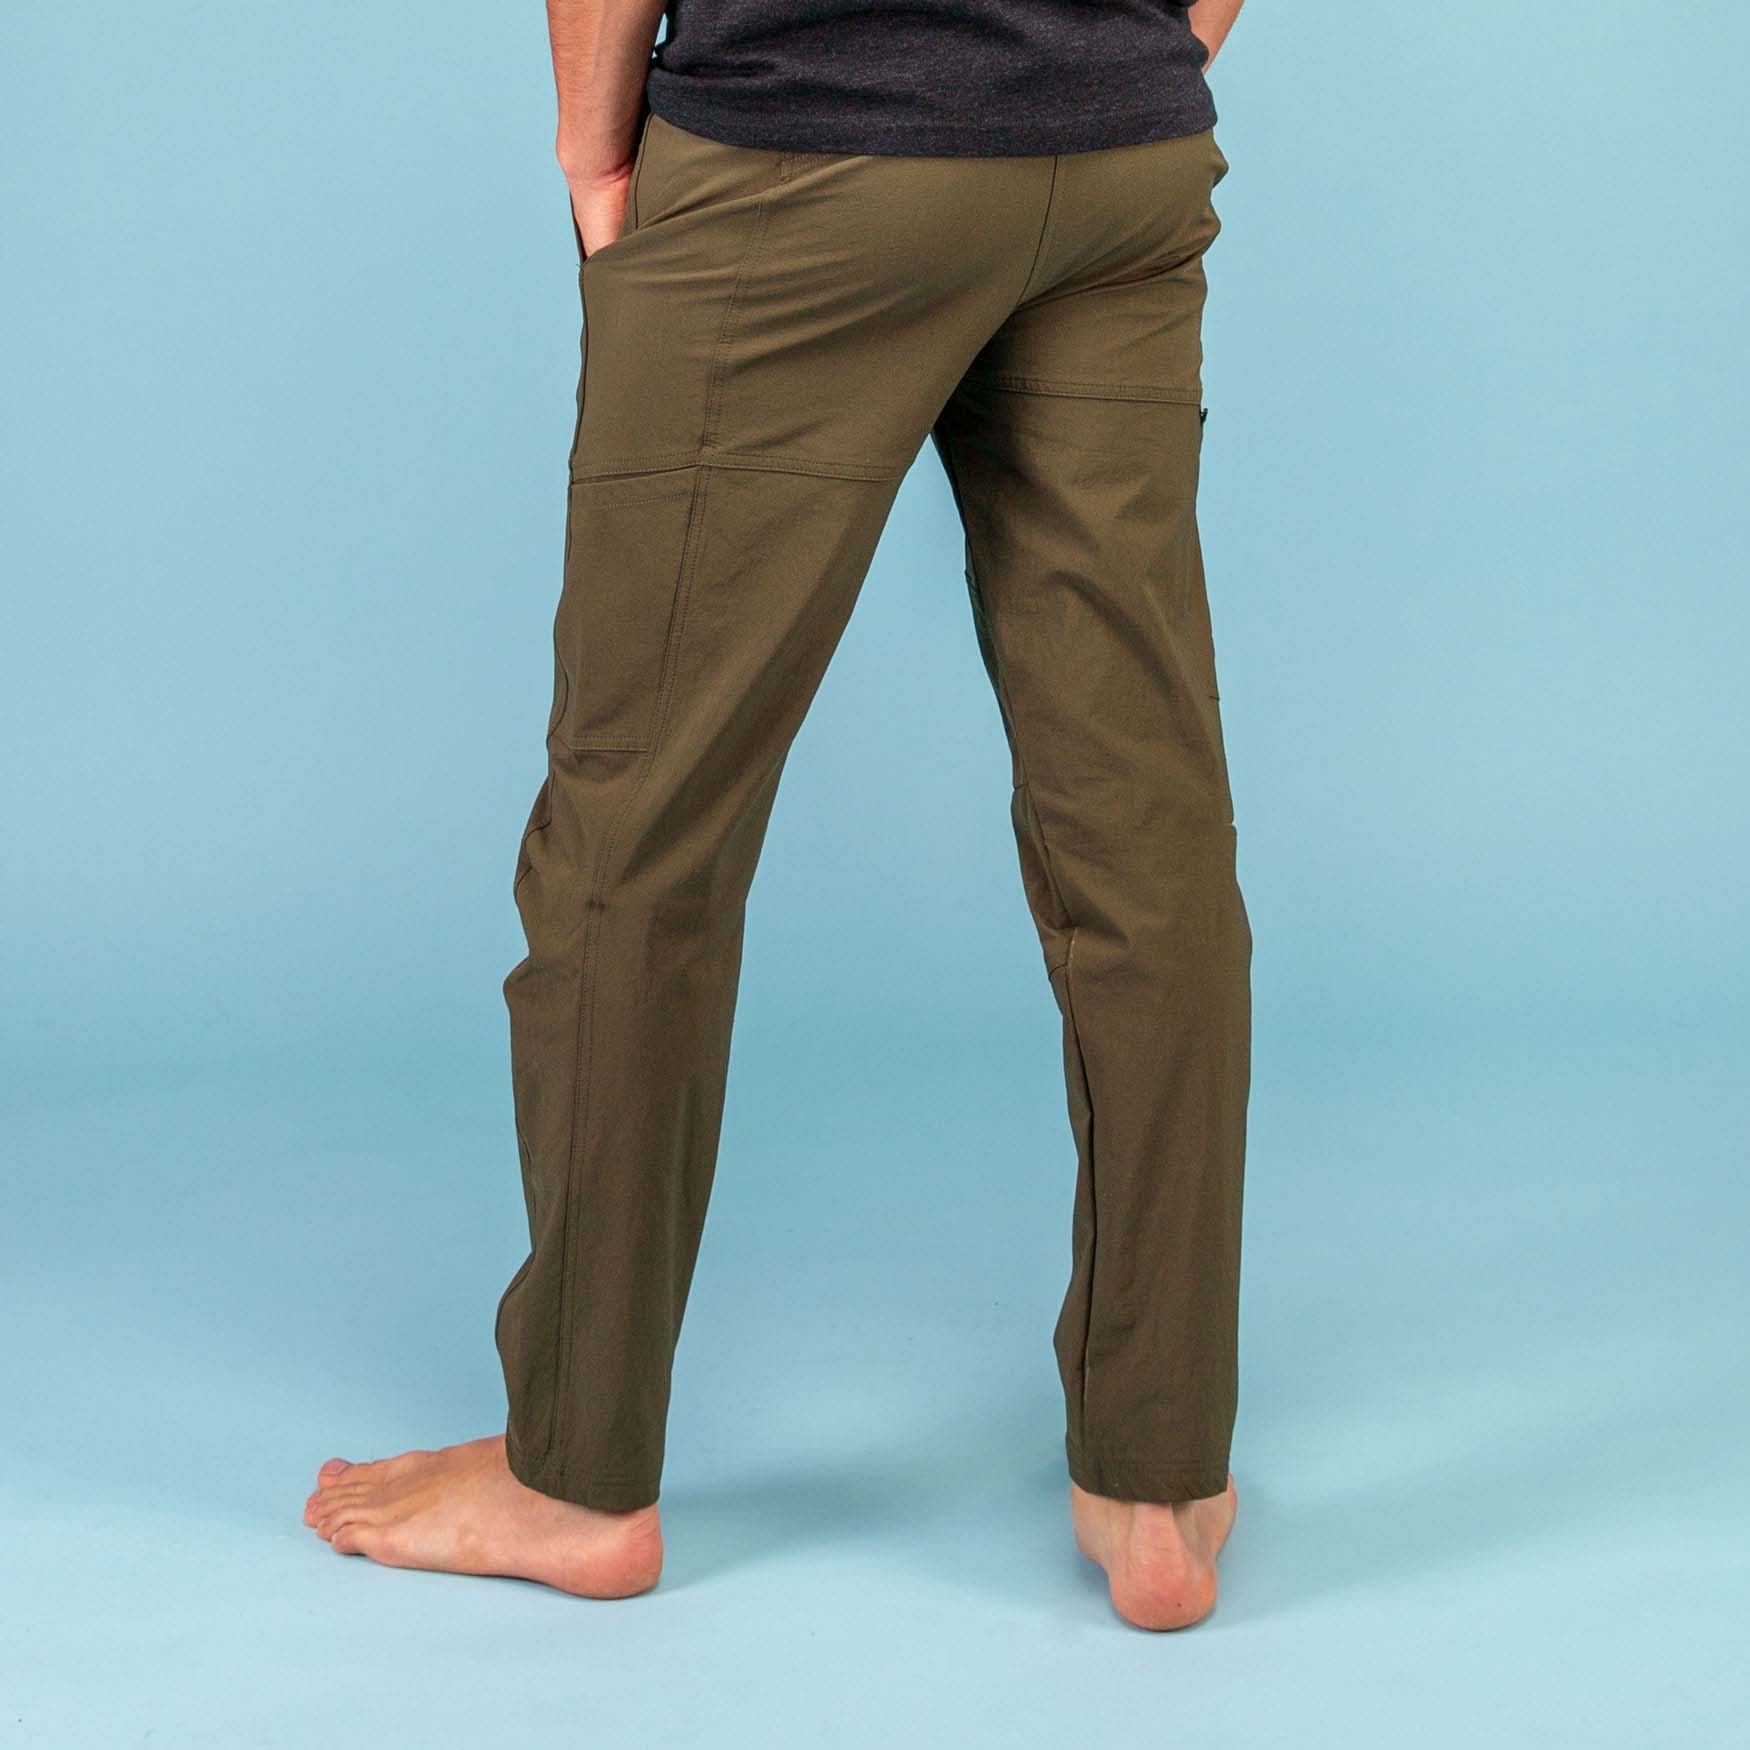 3RD ROCK HIRO Climbing and walking trousers - Oliver is 6ft 2" with a 34" waist, 40" hips and wears a 34/LL M